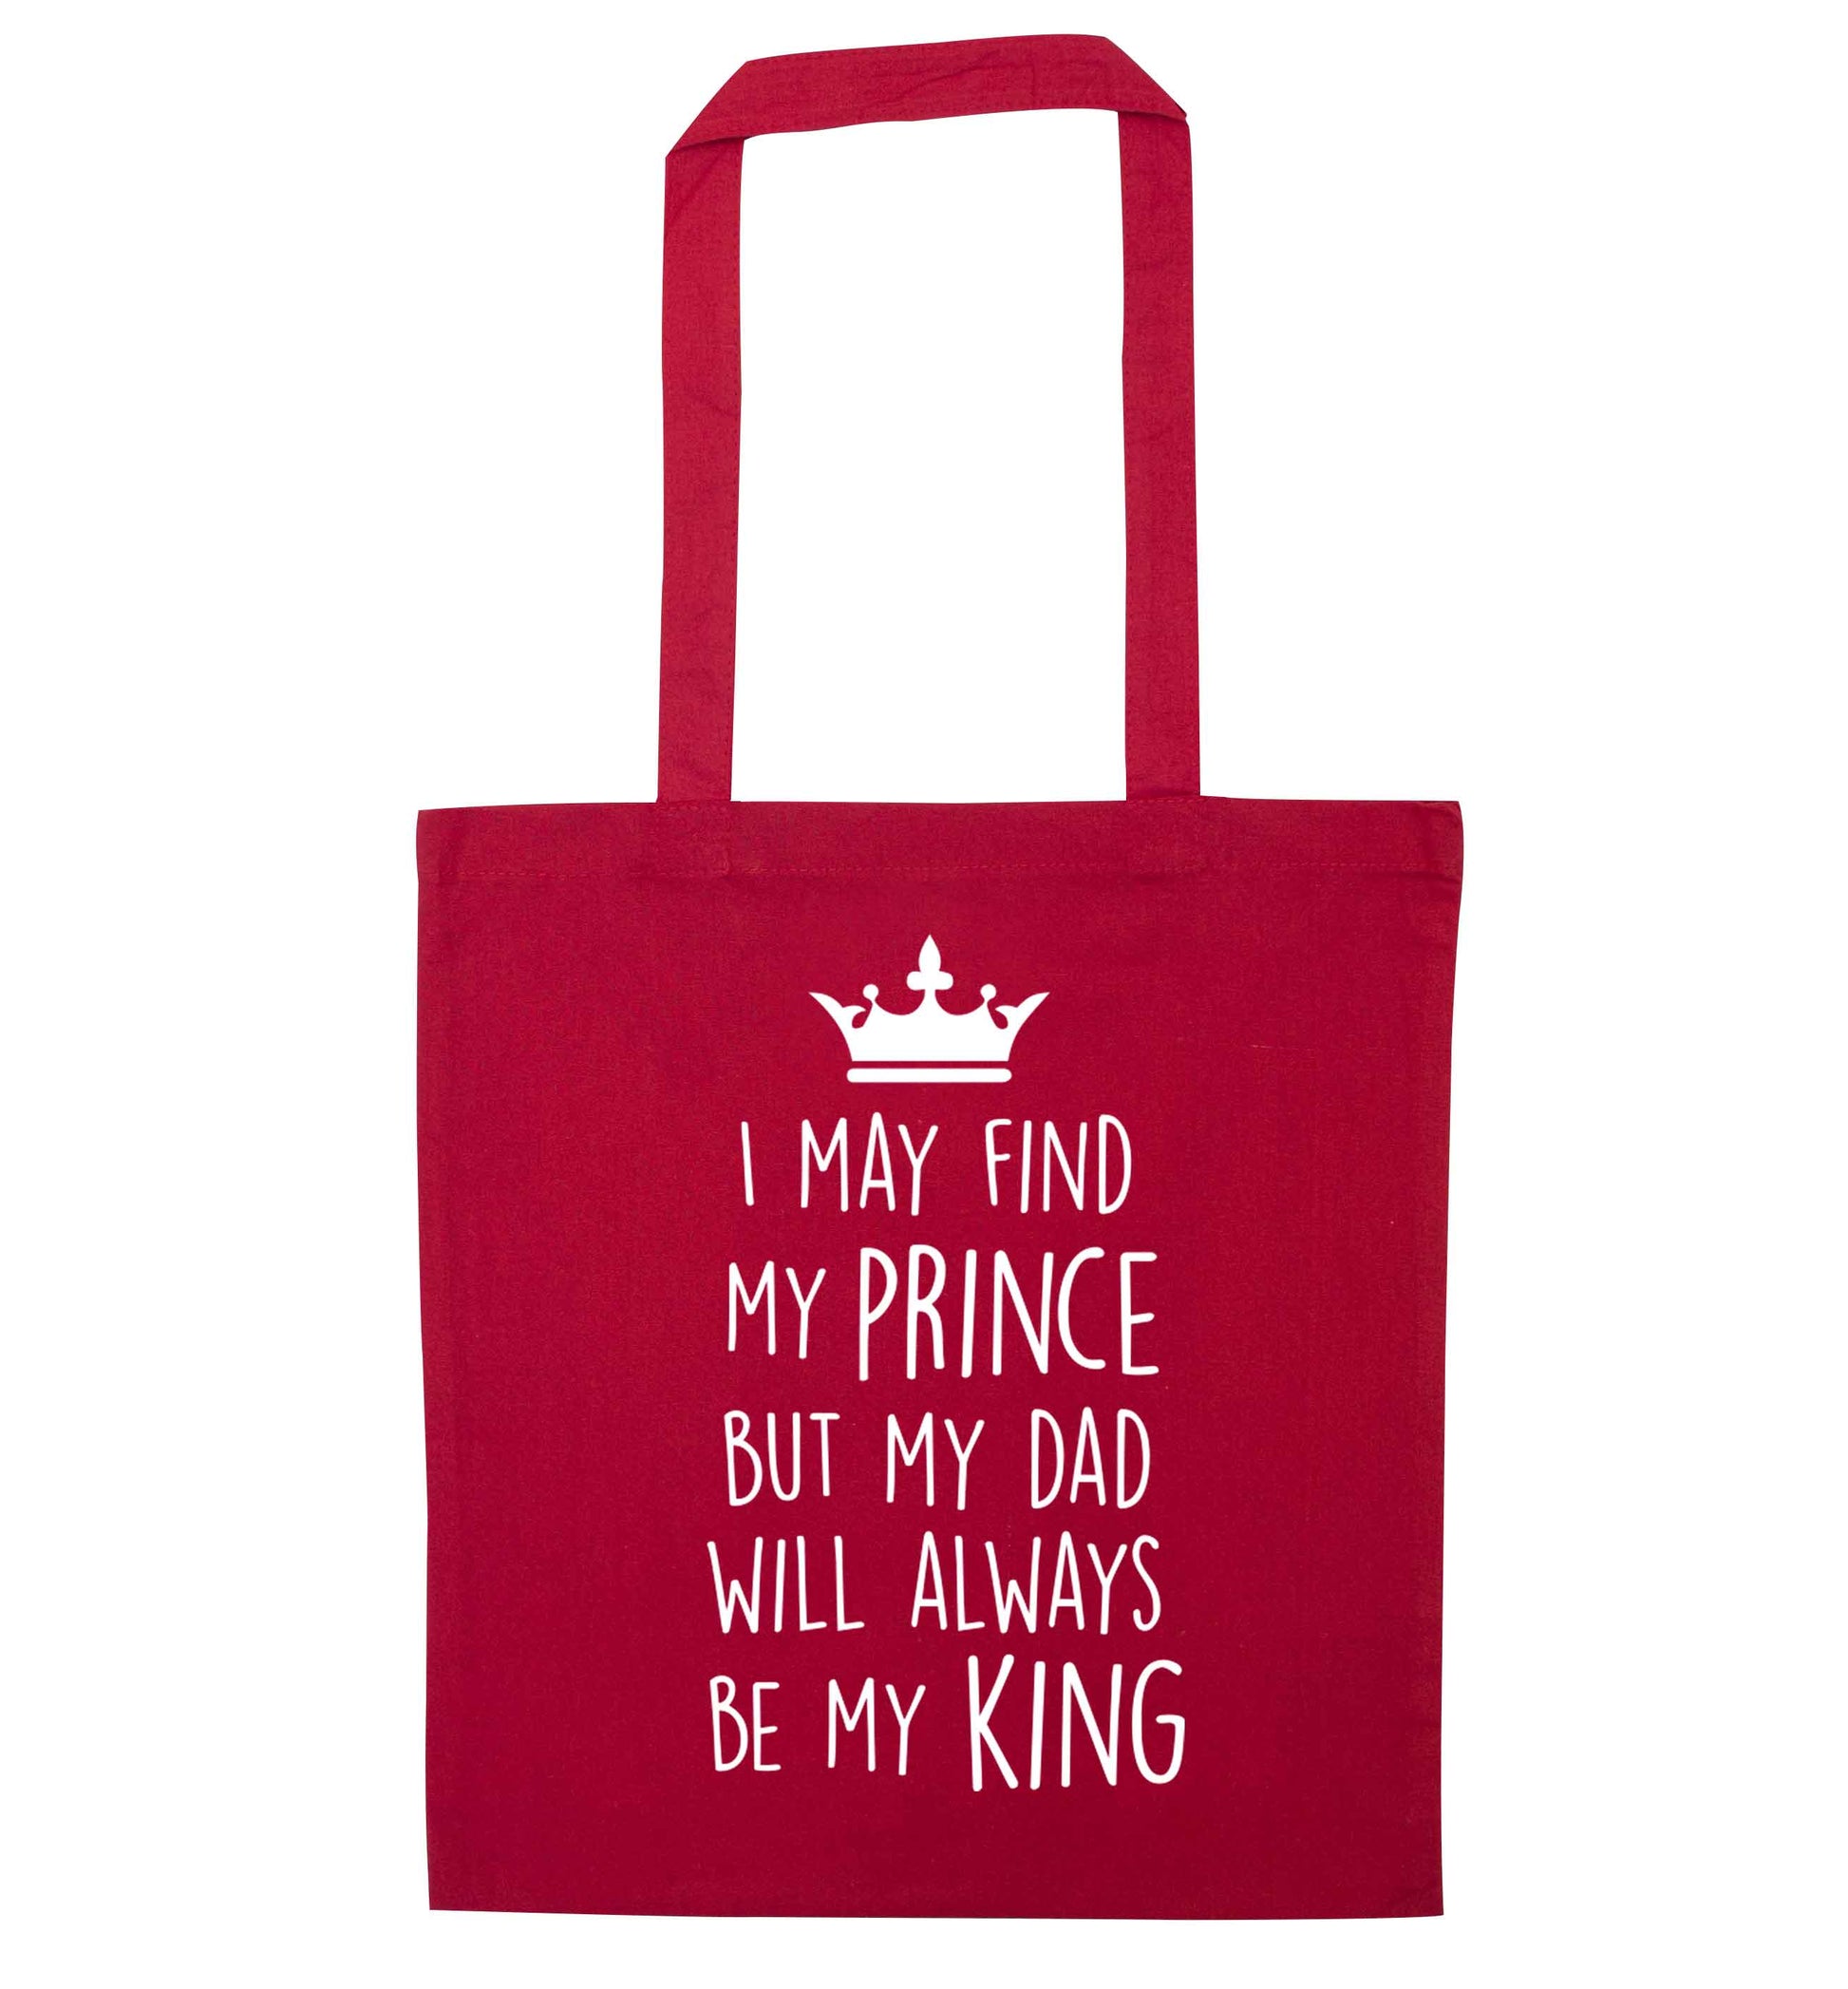 I may find my prince but my dad will always be my king red tote bag